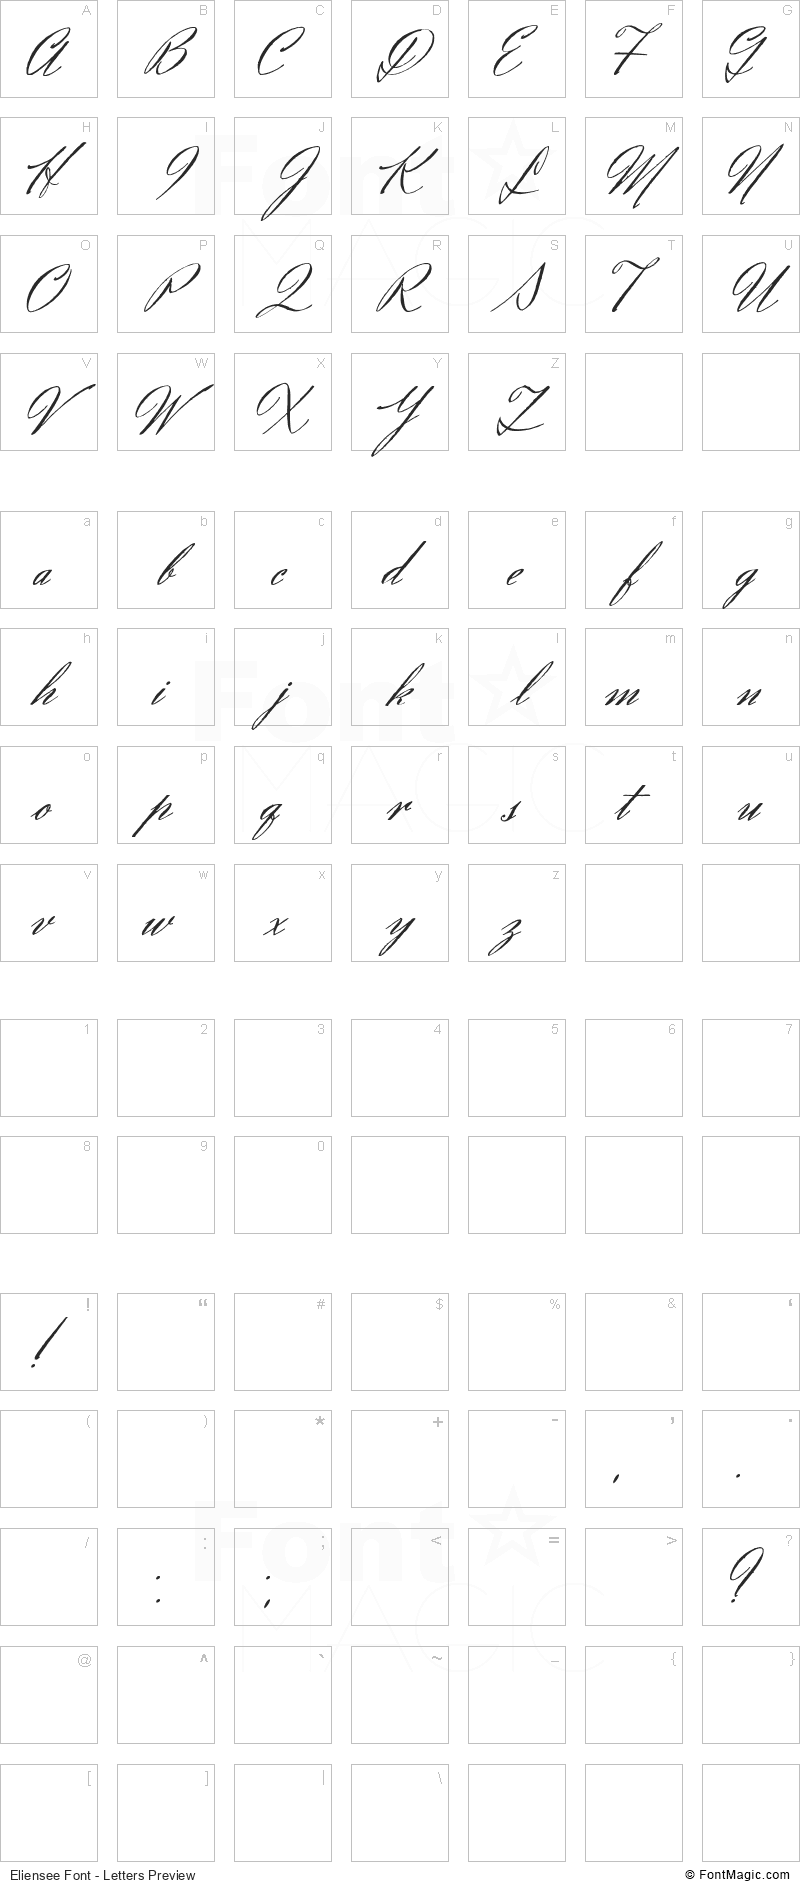 Eliensee Font - All Latters Preview Chart